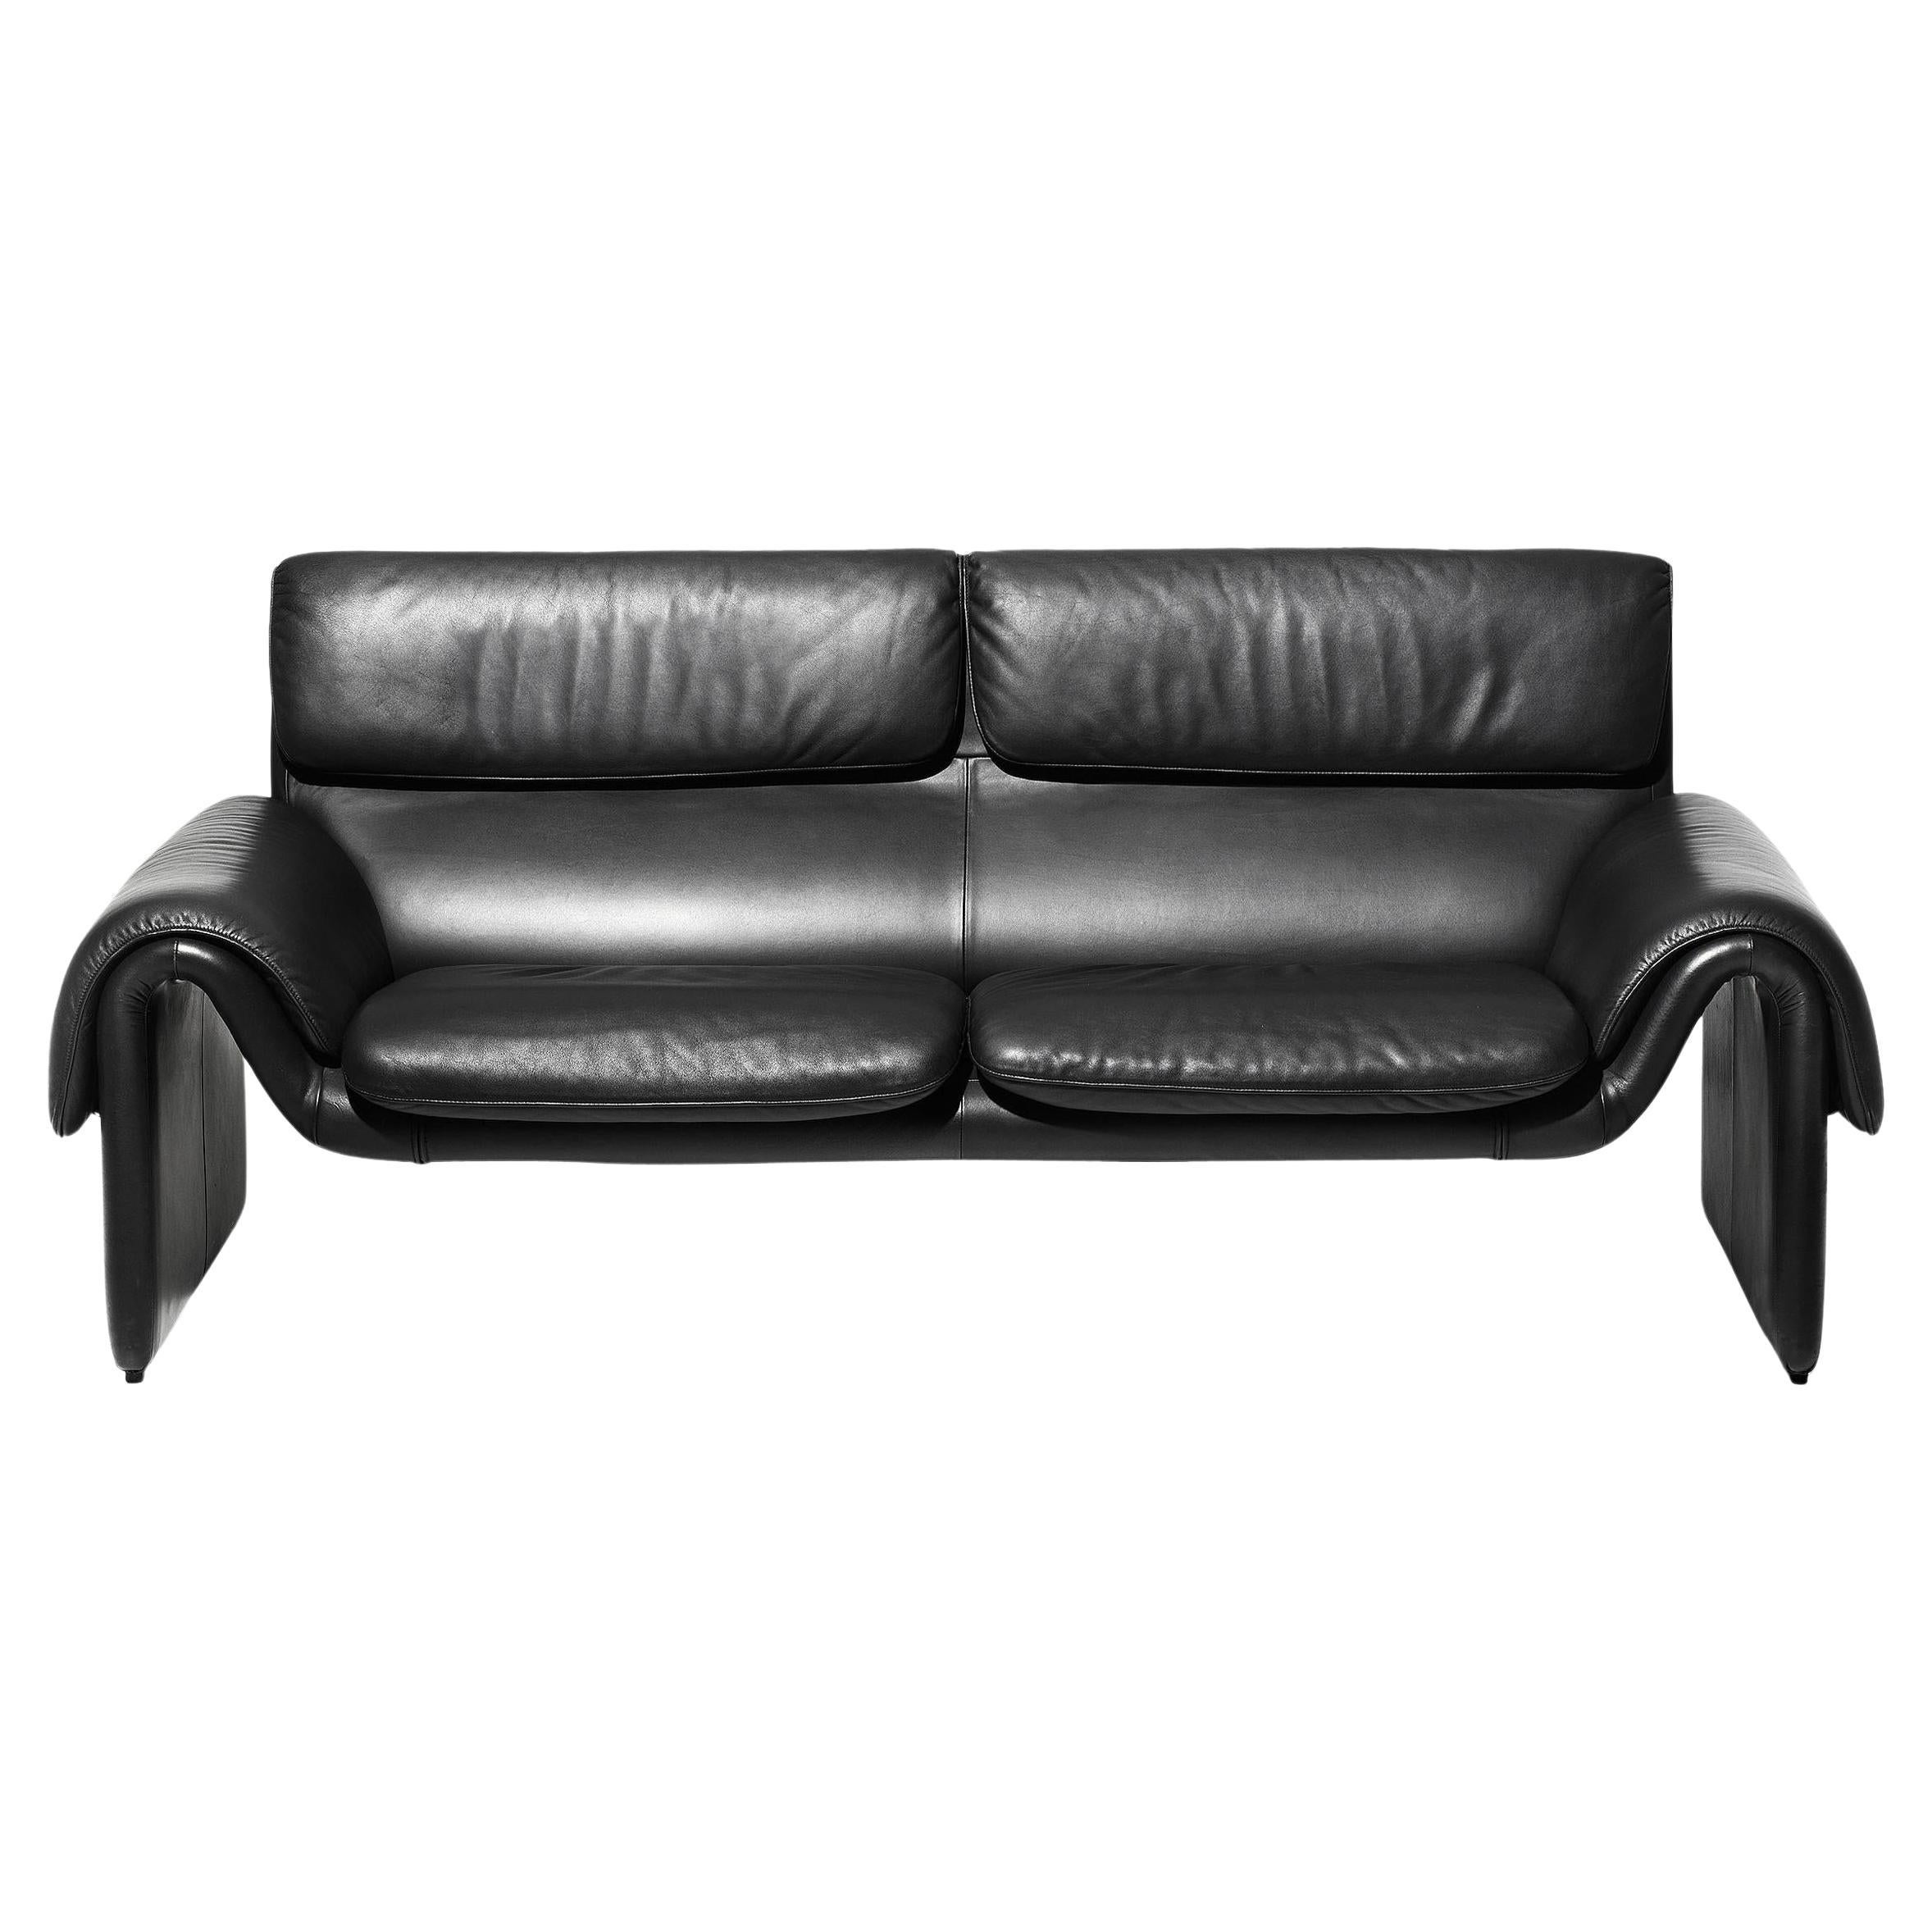 De Sede DS-2011 Two-Seat Sofa in Black Upholstery by De Sede Design Team For Sale